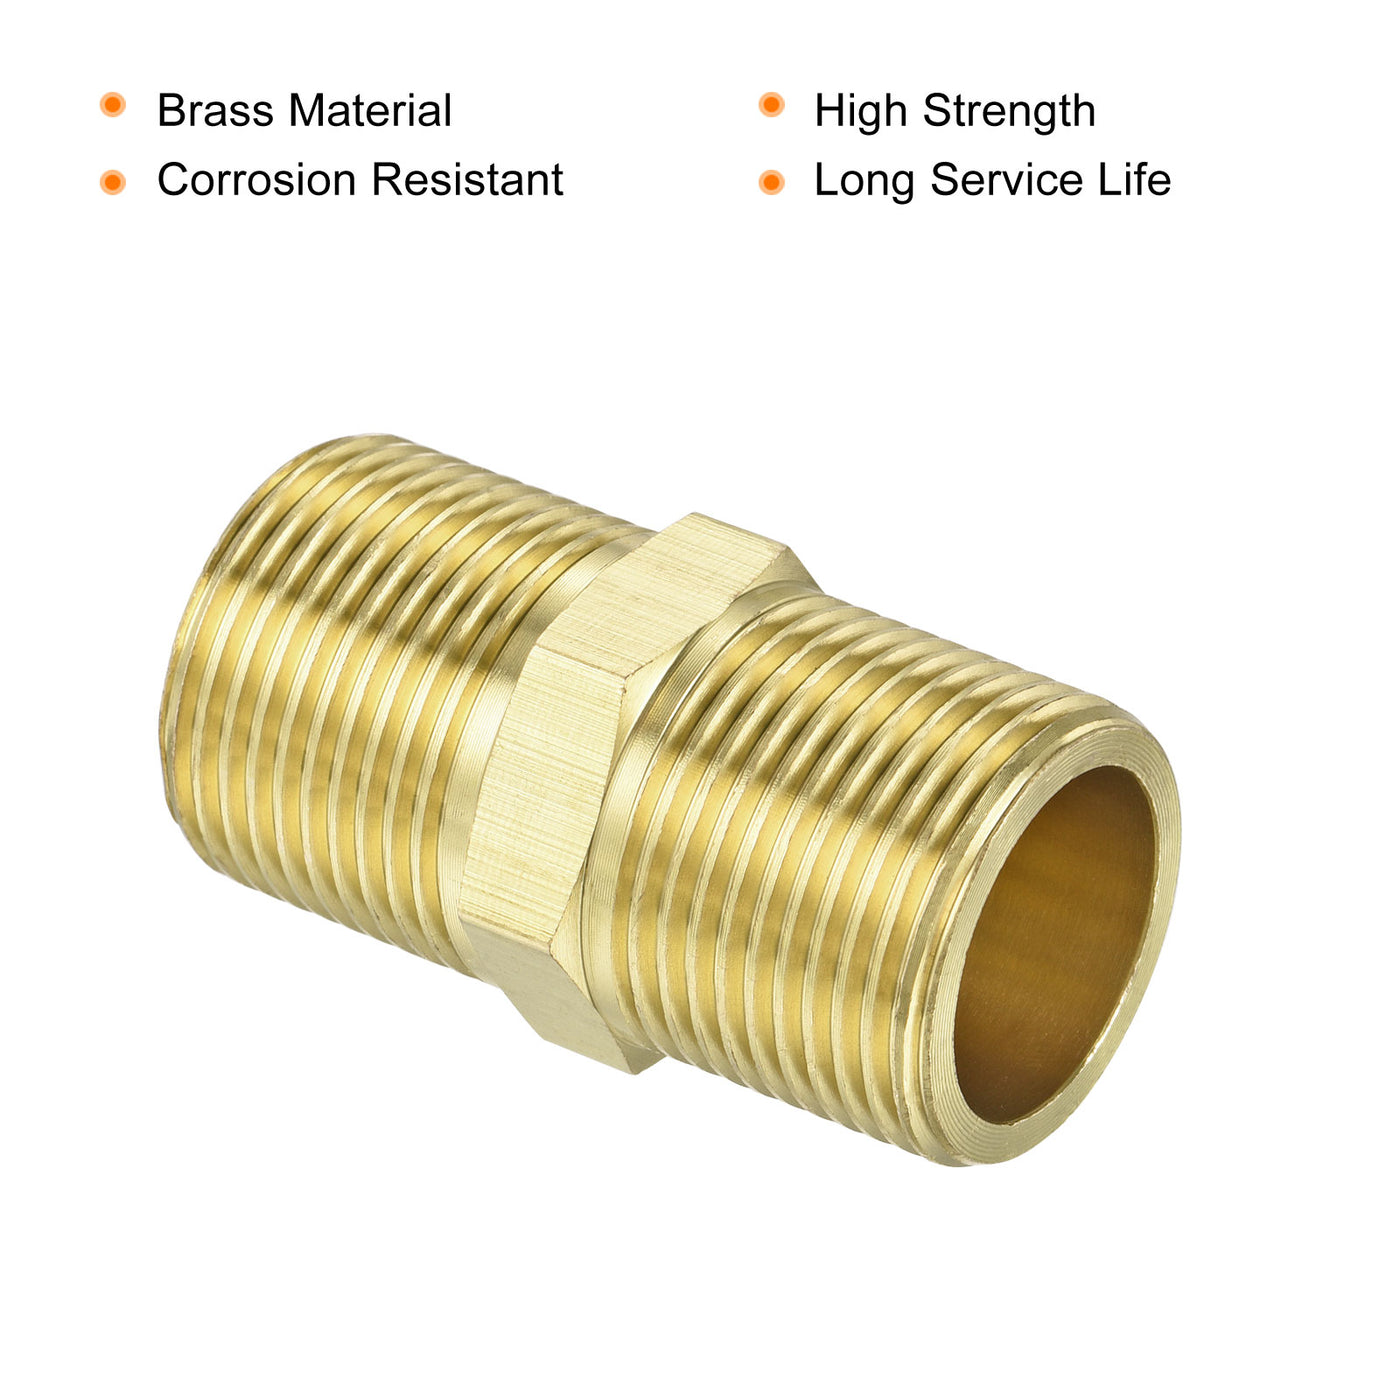 Harfington Brass Pipe Fitting G3/4 Male Thread 50mm Hex Connector Pipe Adapter 2 Pack